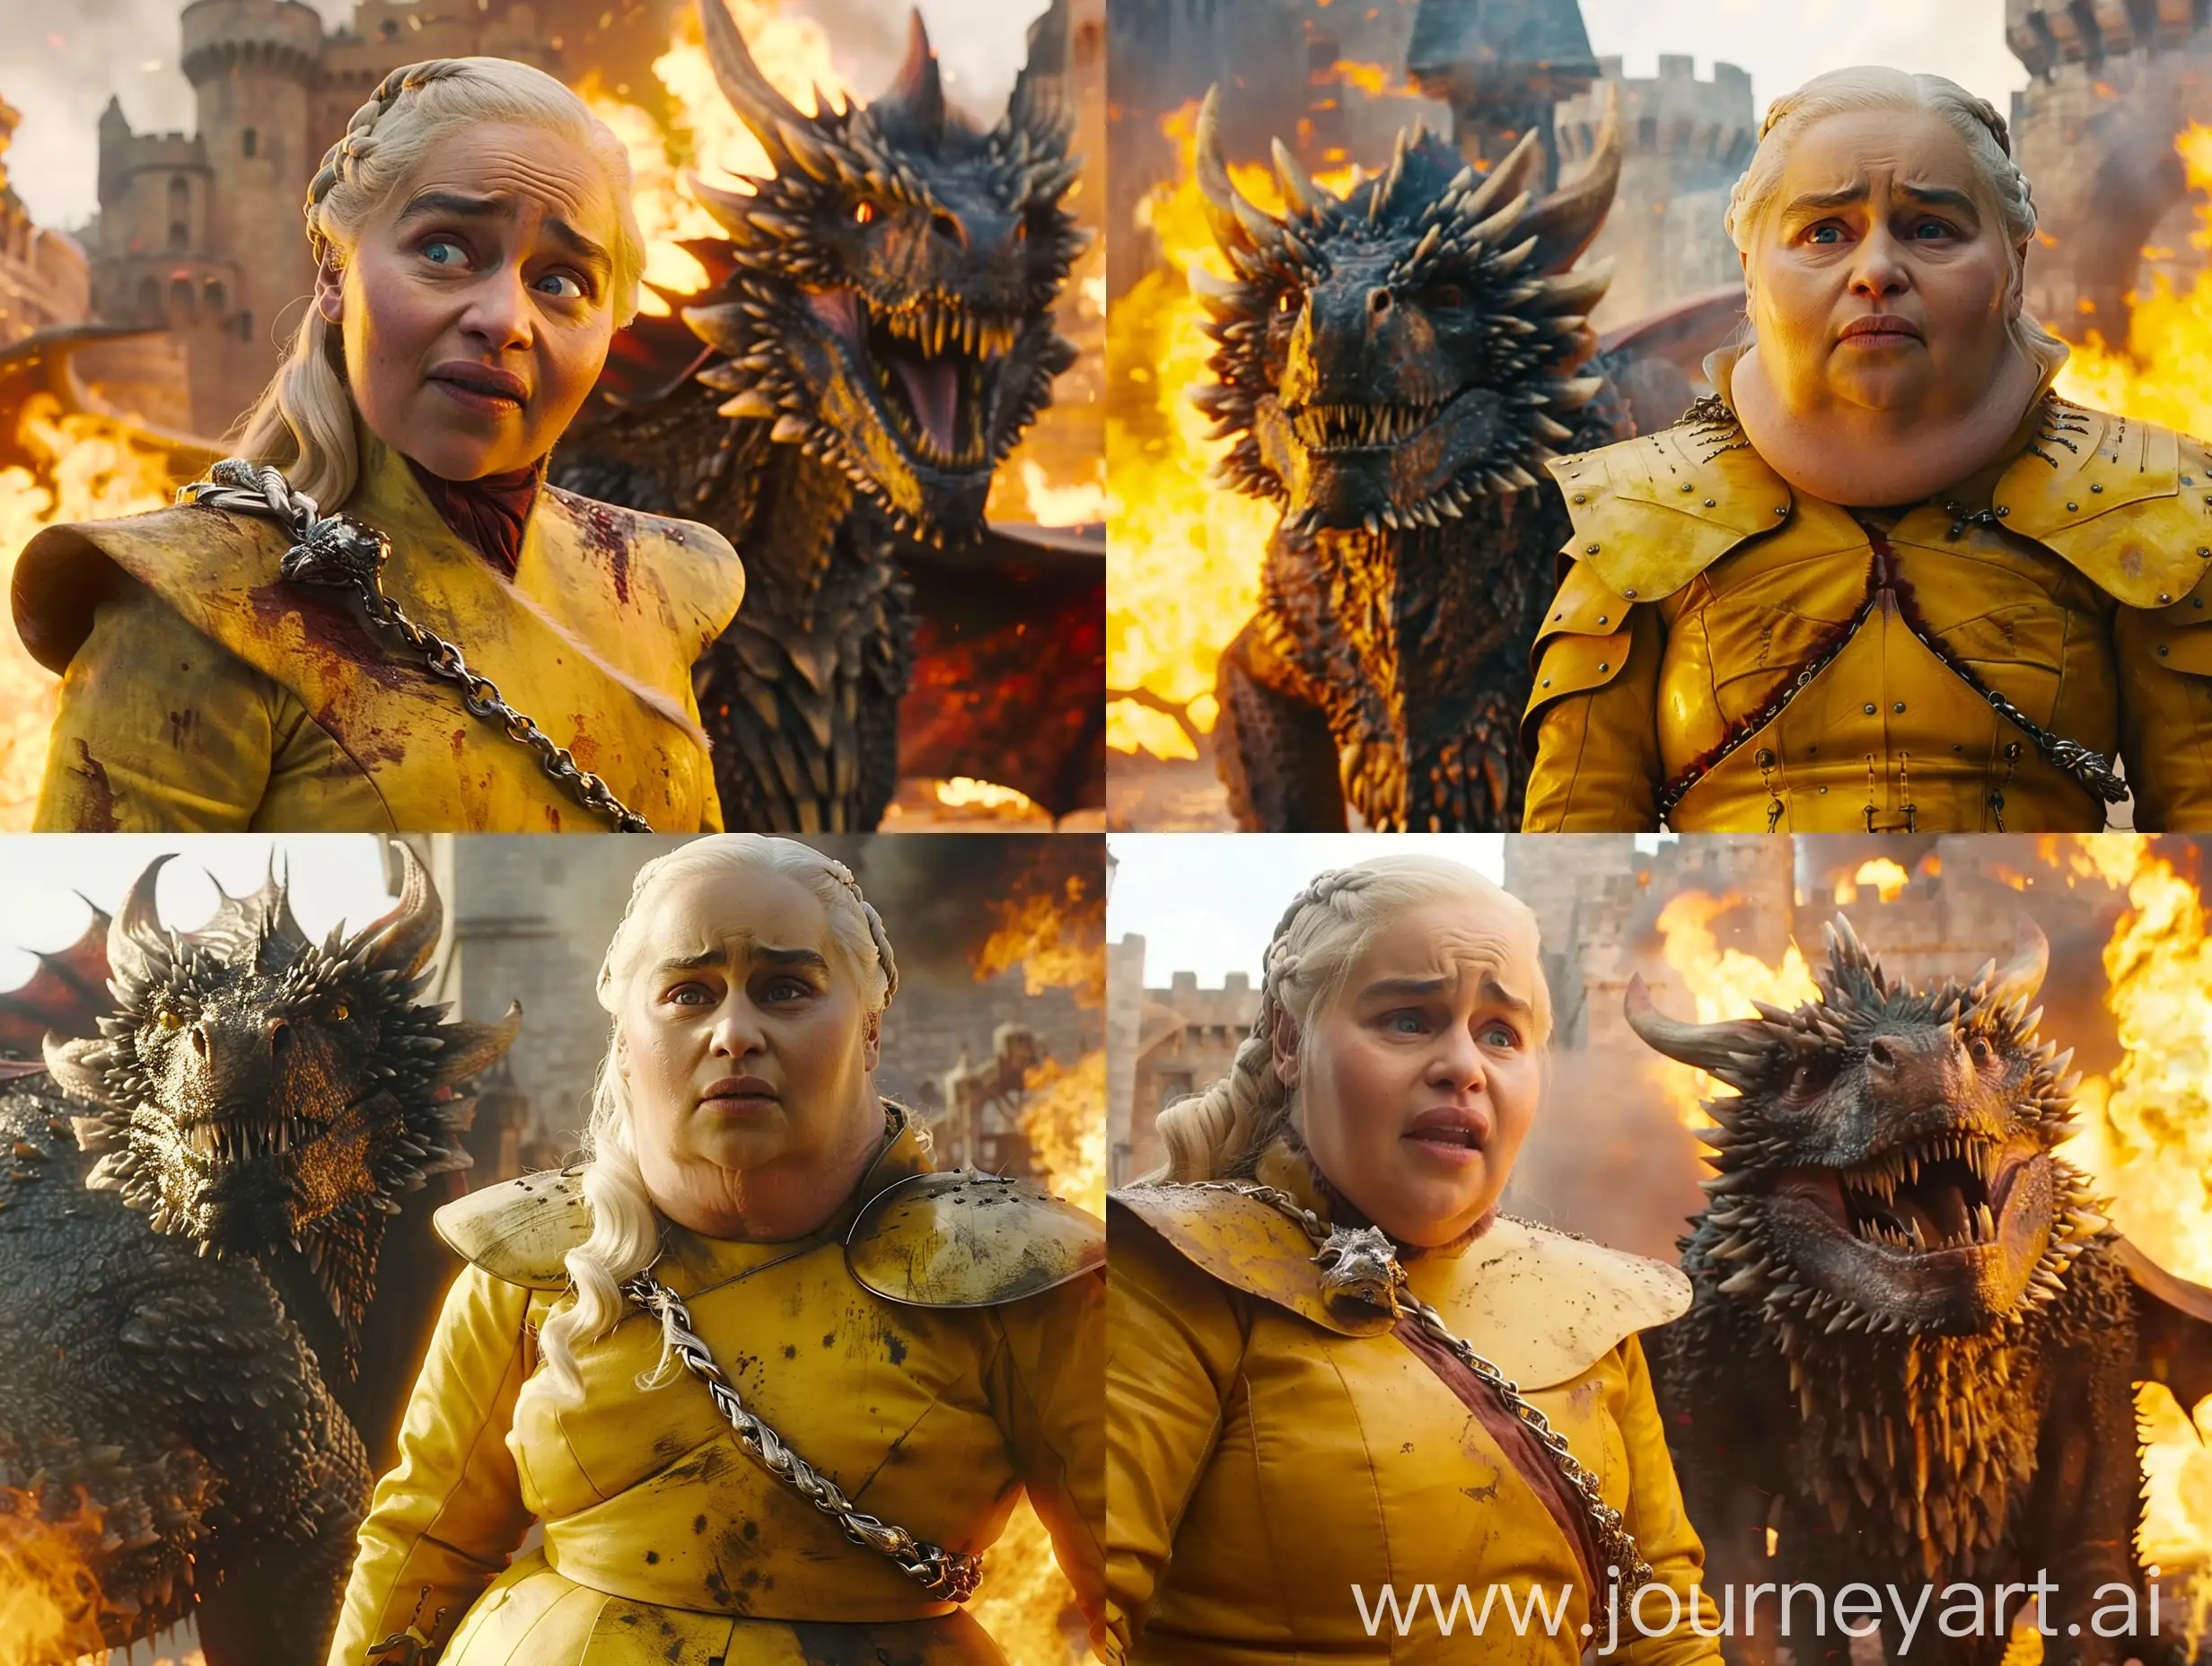 Daenerys Targaryen in Game of Thrones series, Daenerys Targaryen is very fat and has a very fat face and body, Daenerys Targaryen is wearing yellow military armor, Daenerys Targaryen is standing next to the dragon dragon. Daenerys Targaryen and the dragon are surrounded by flames, the background is a burning castle. Daenerys Targaryen looks at the camera with a determined expression, classic lighting, q2